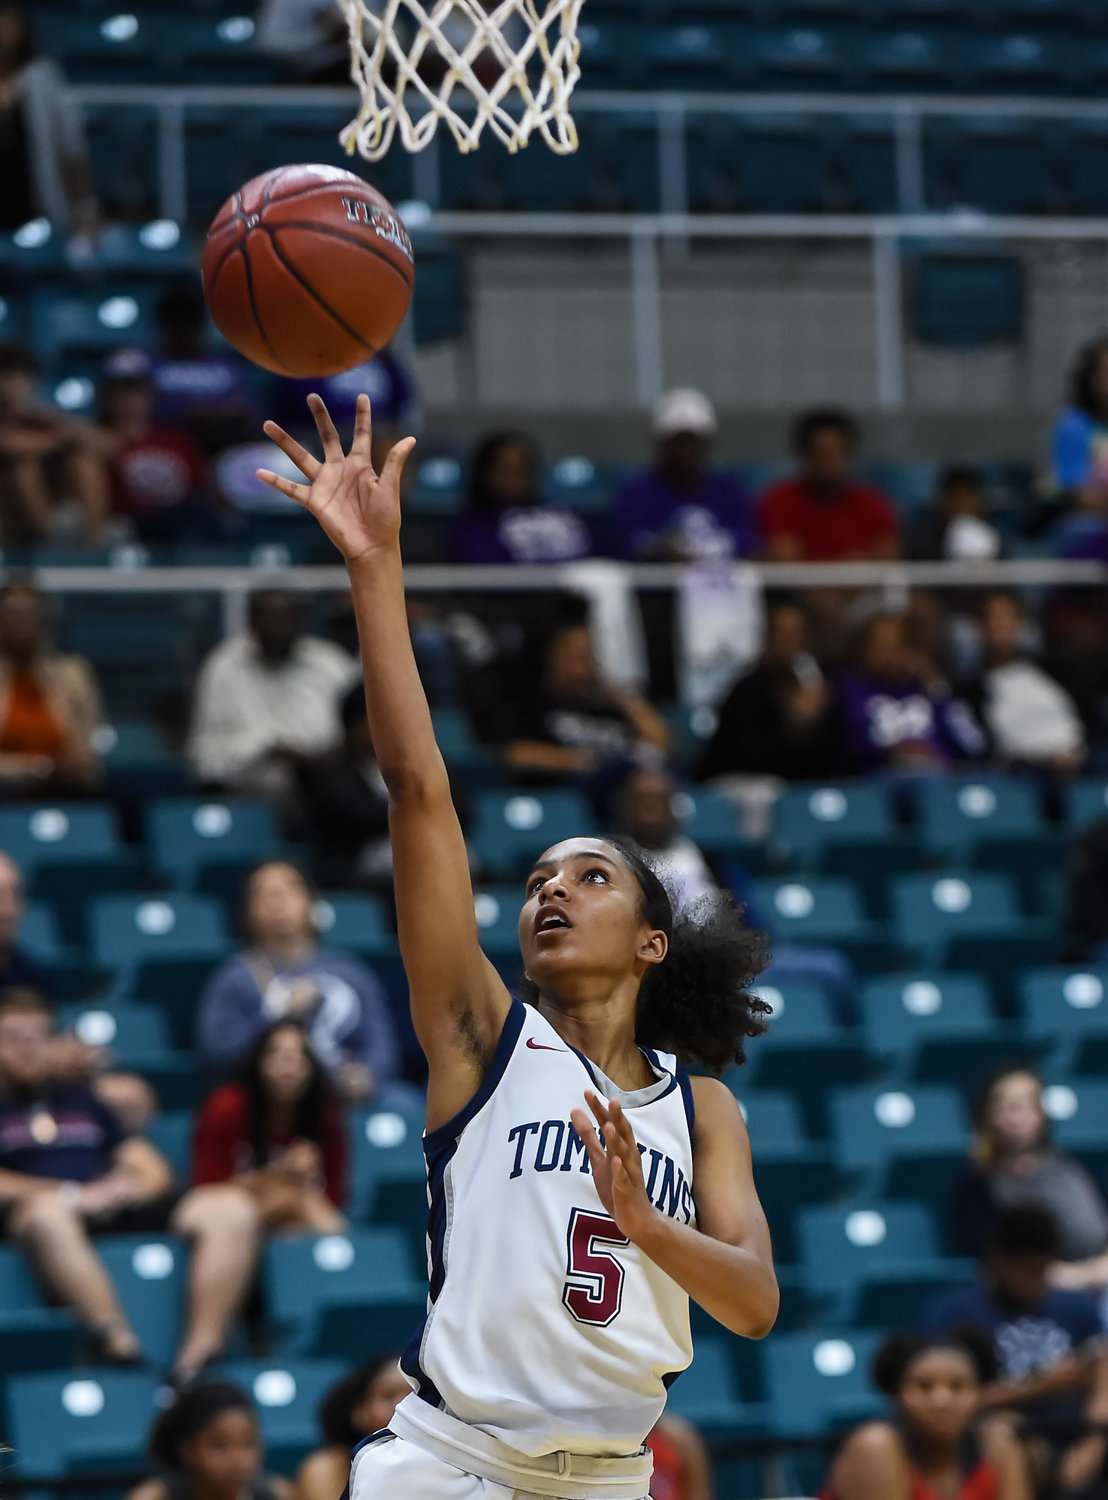 Tompkins senior guard Crystal Smith was named as a nominee for the 44th annual McDonald’s All-American girls team on Thursday.